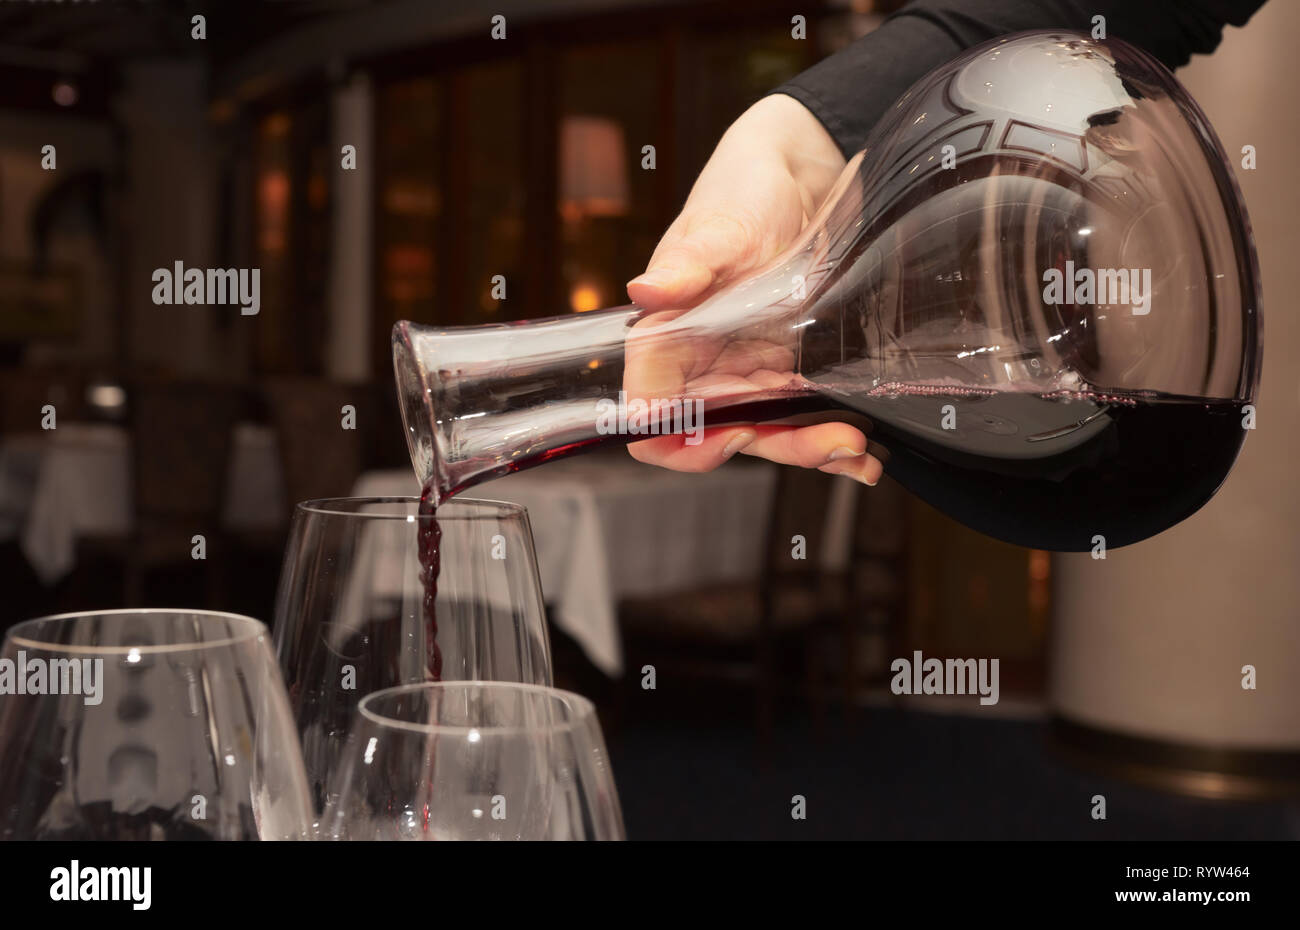 https://c8.alamy.com/comp/RYW464/waiter-pouring-red-wine-from-decanter-in-dark-restaurant-RYW464.jpg